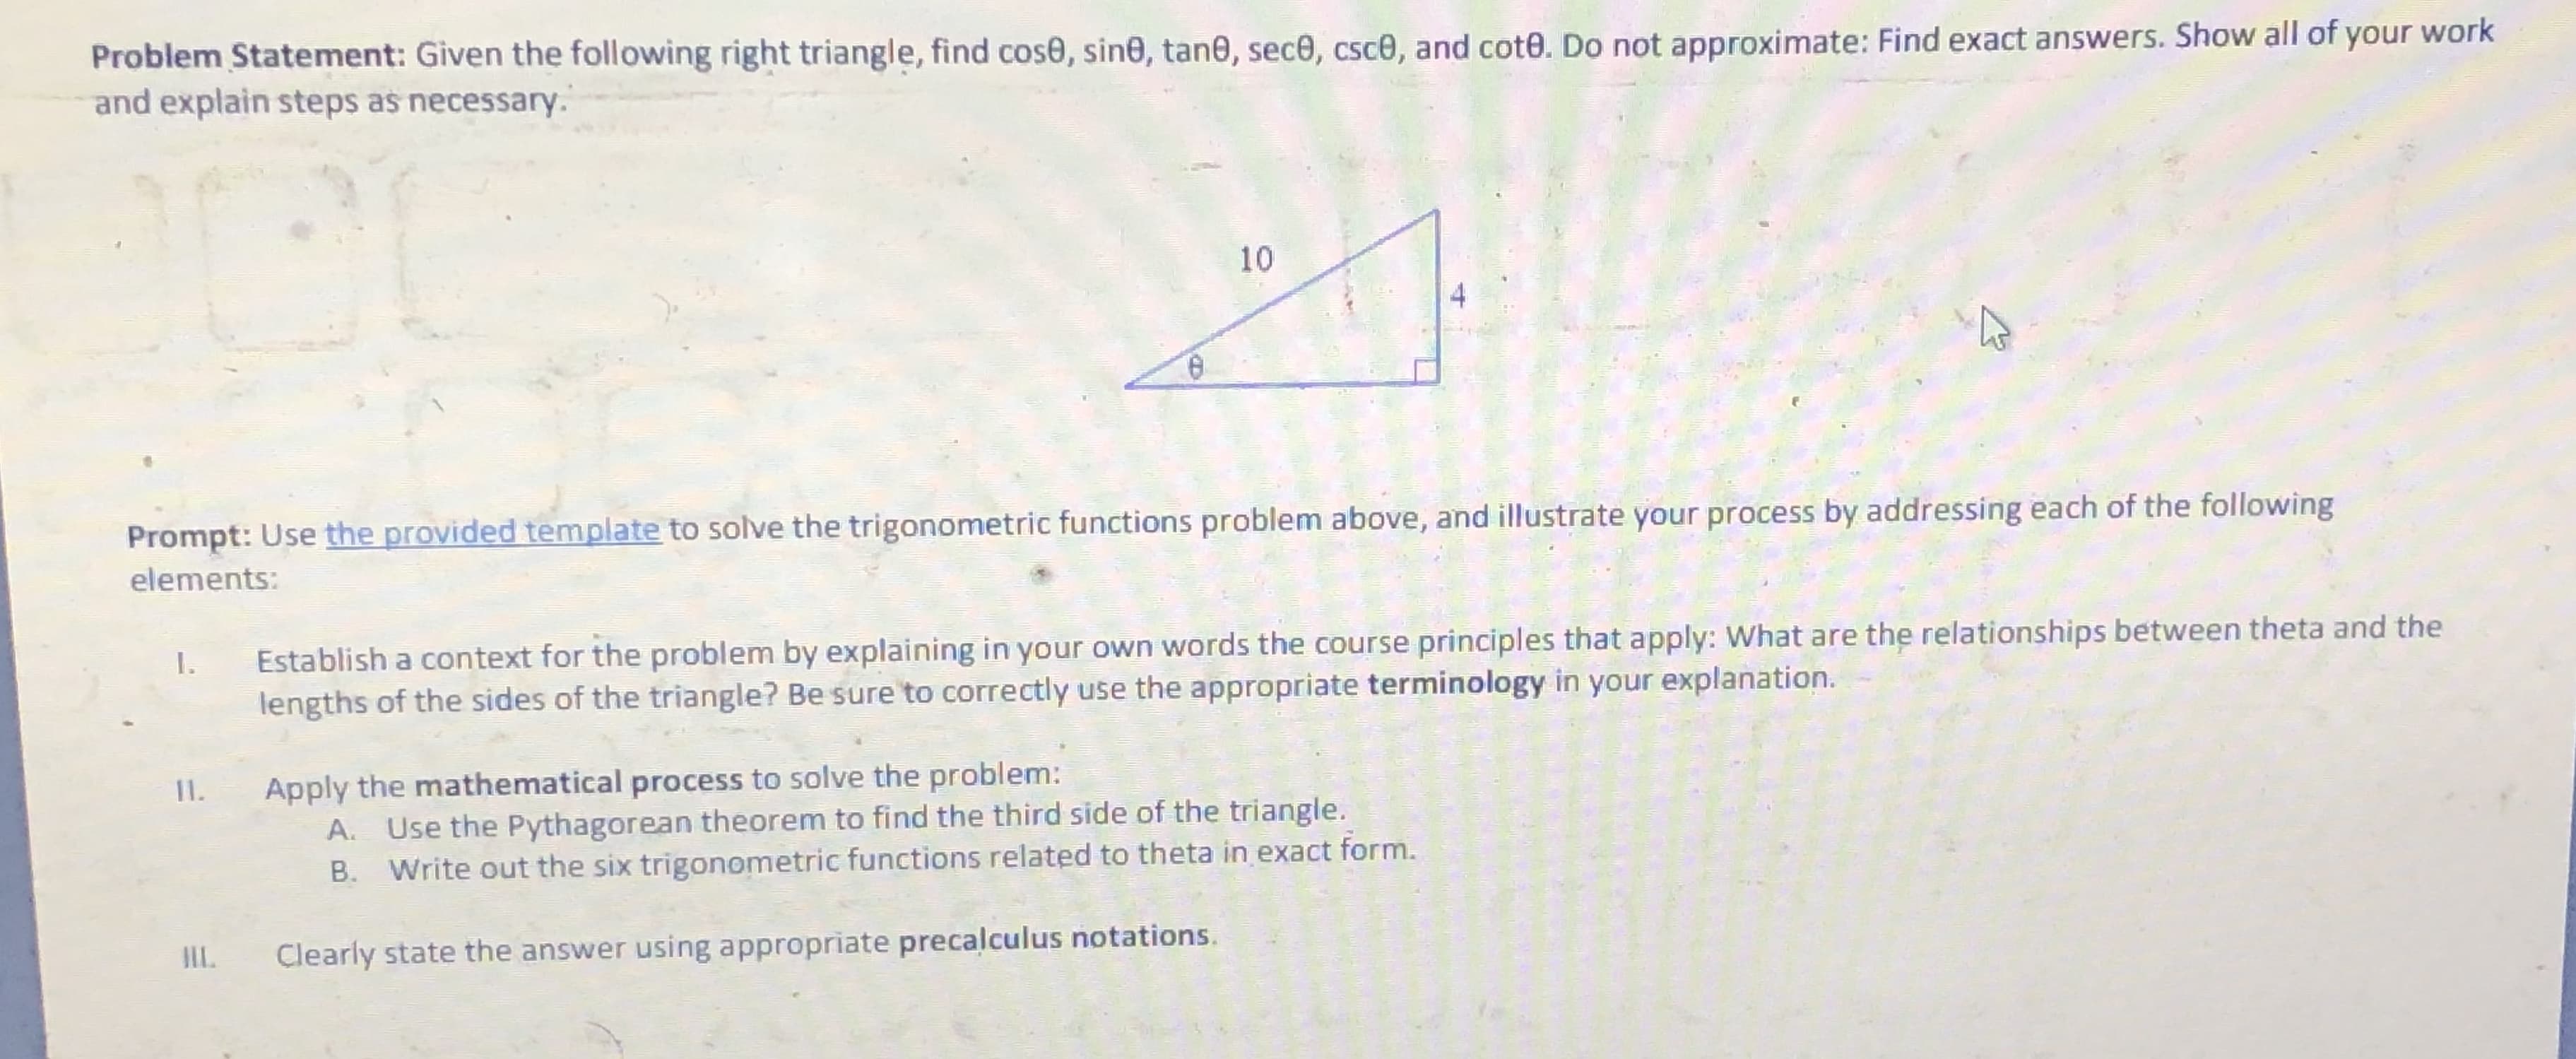 Problem Statement: Given the following right triangle, find cose, sine, tane, sece, csce, and cot0. Do not approximate: Find exact answers. Show all of your work
and explain steps as necessary.
10
